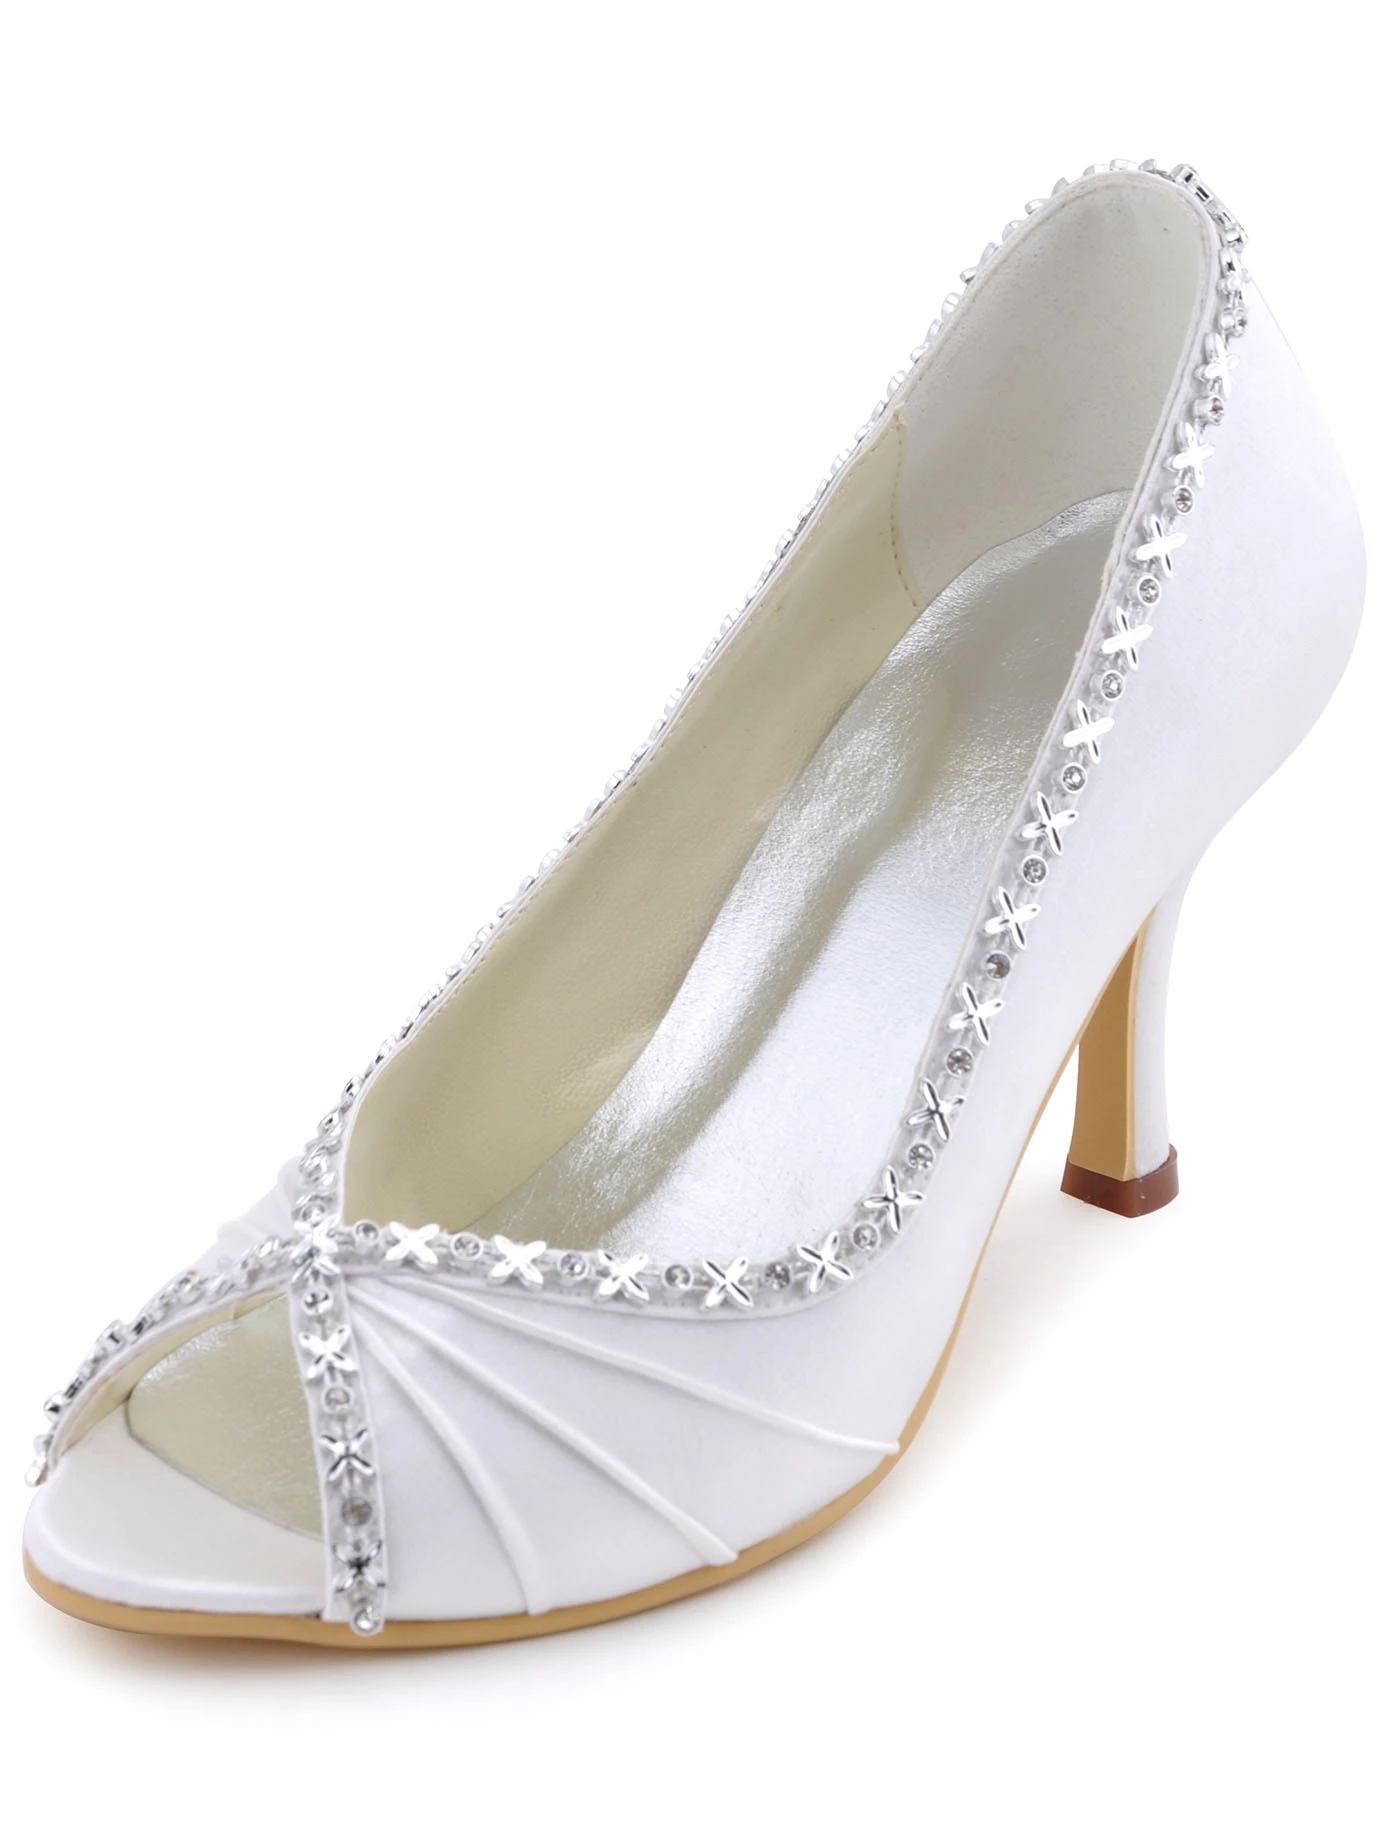 Women's Comfortable Glitter High Heel Wedding Shoes With Diamond, Openwork  Design And Back Strap | SHEIN USA